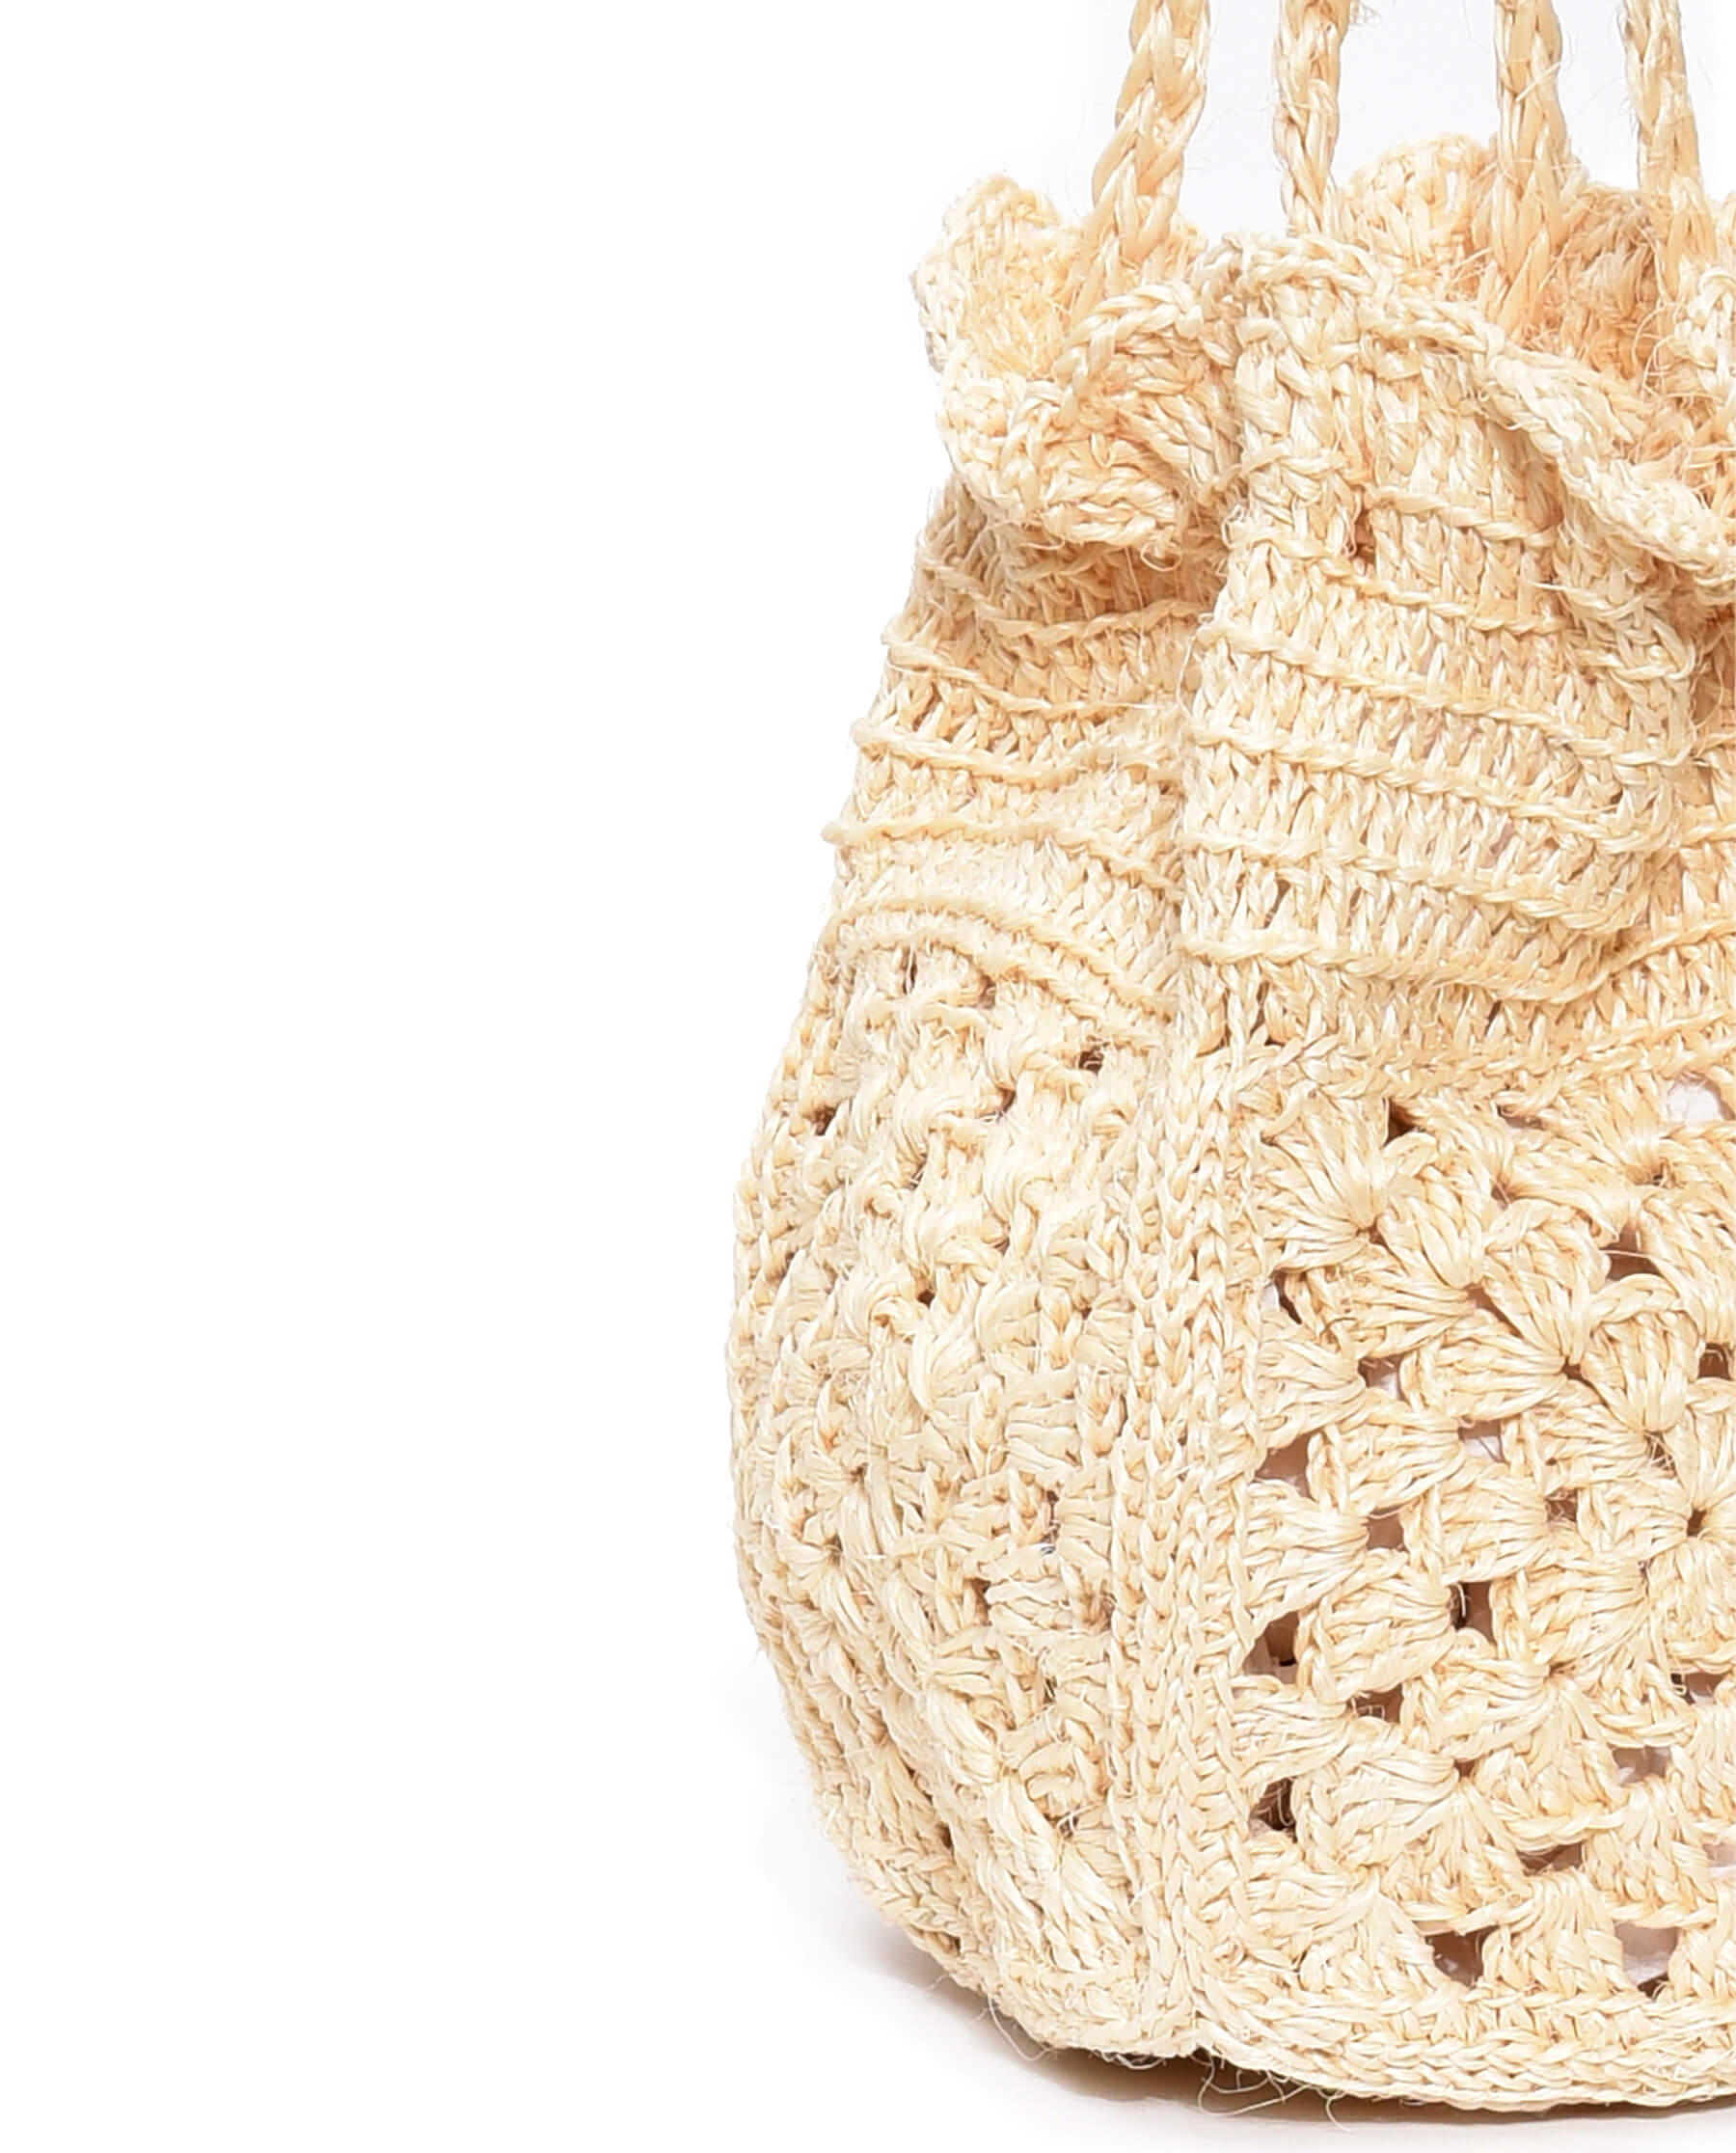 The Crochet Drawstring Bag. -- Natural ACCESSORIES THE GREAT. SU23